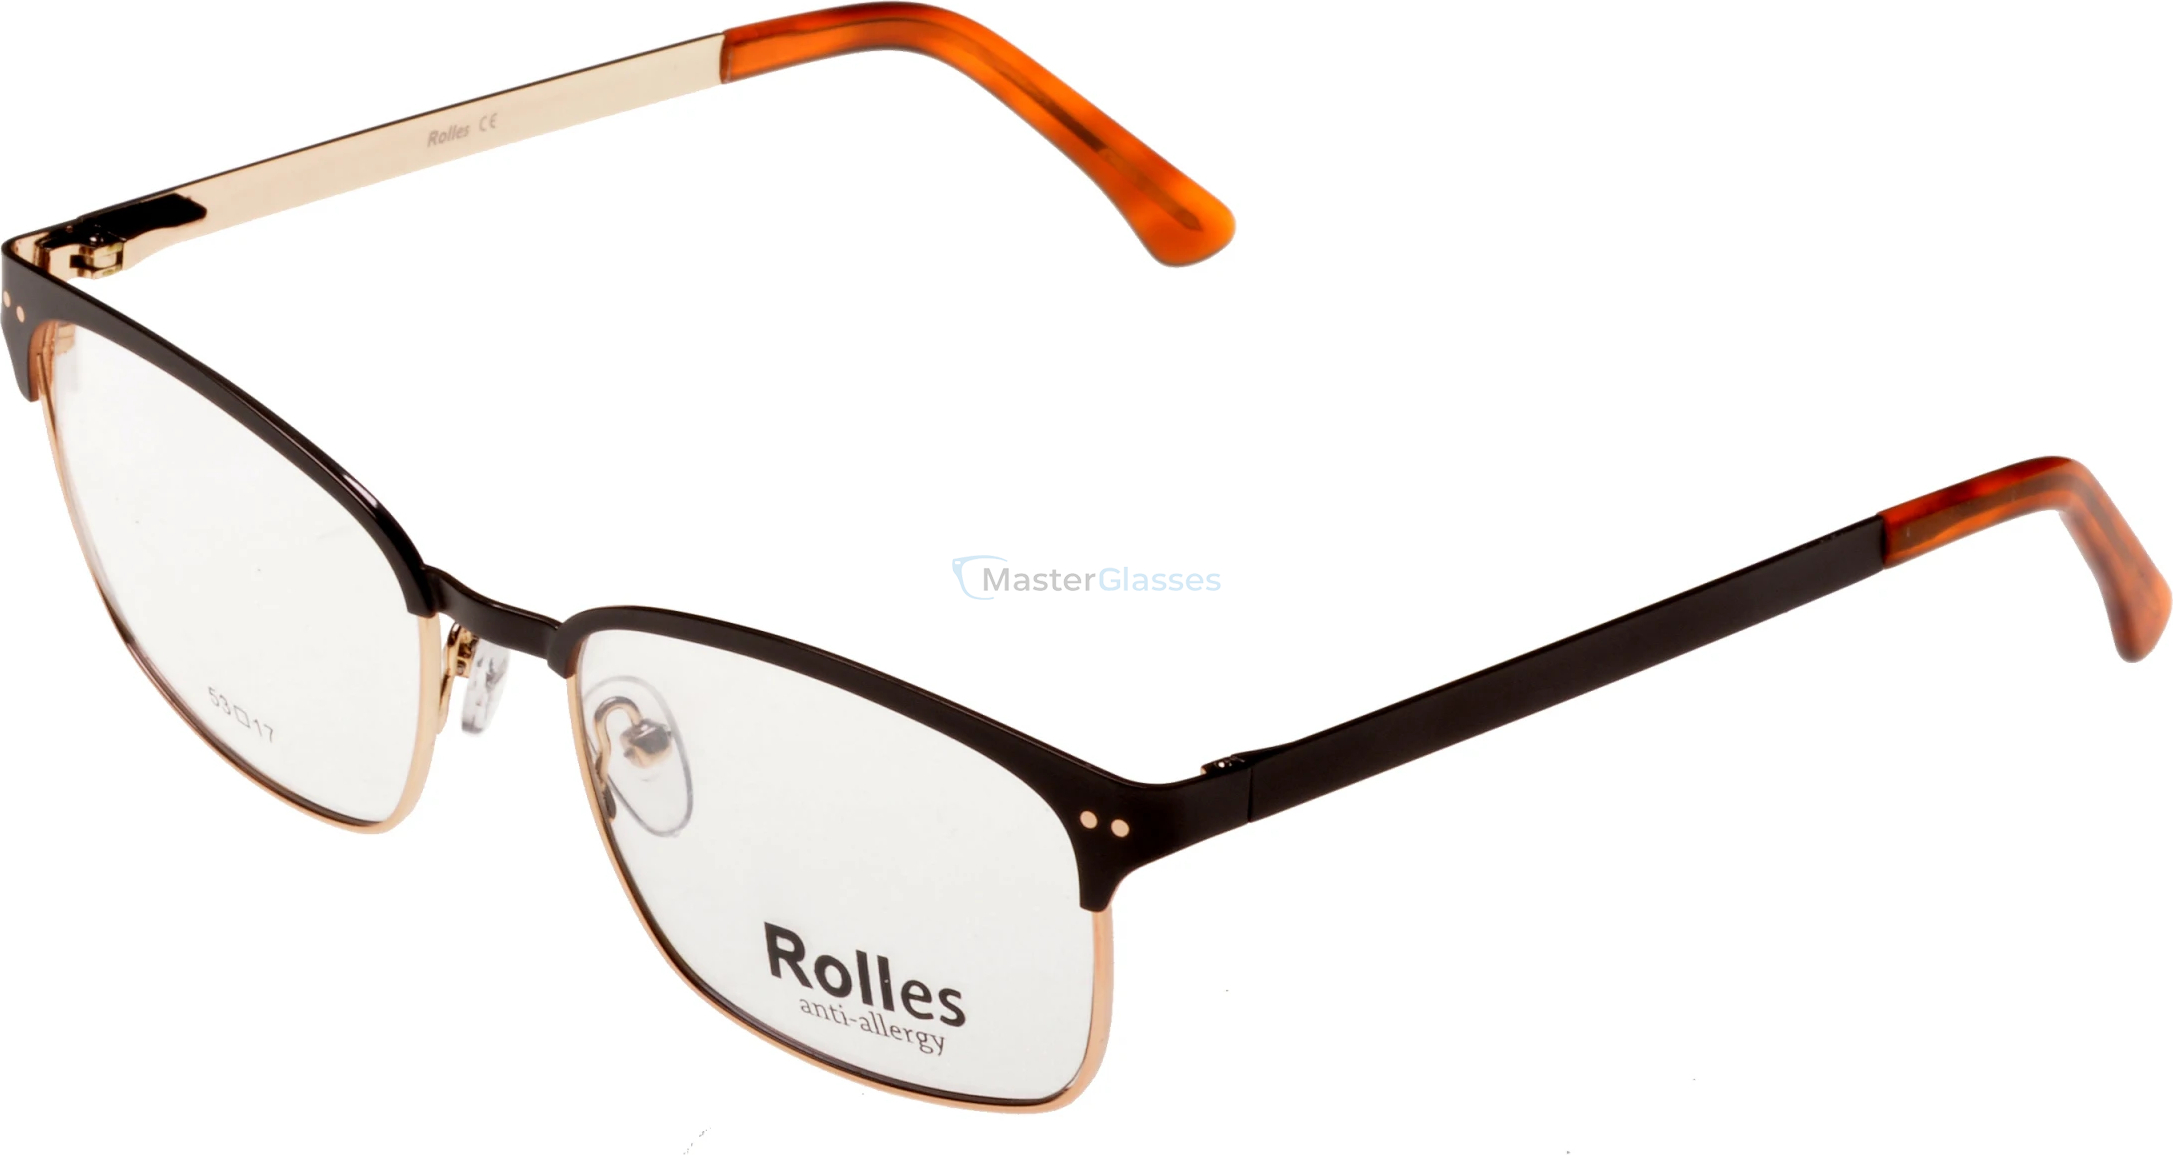  Rolles 464 01